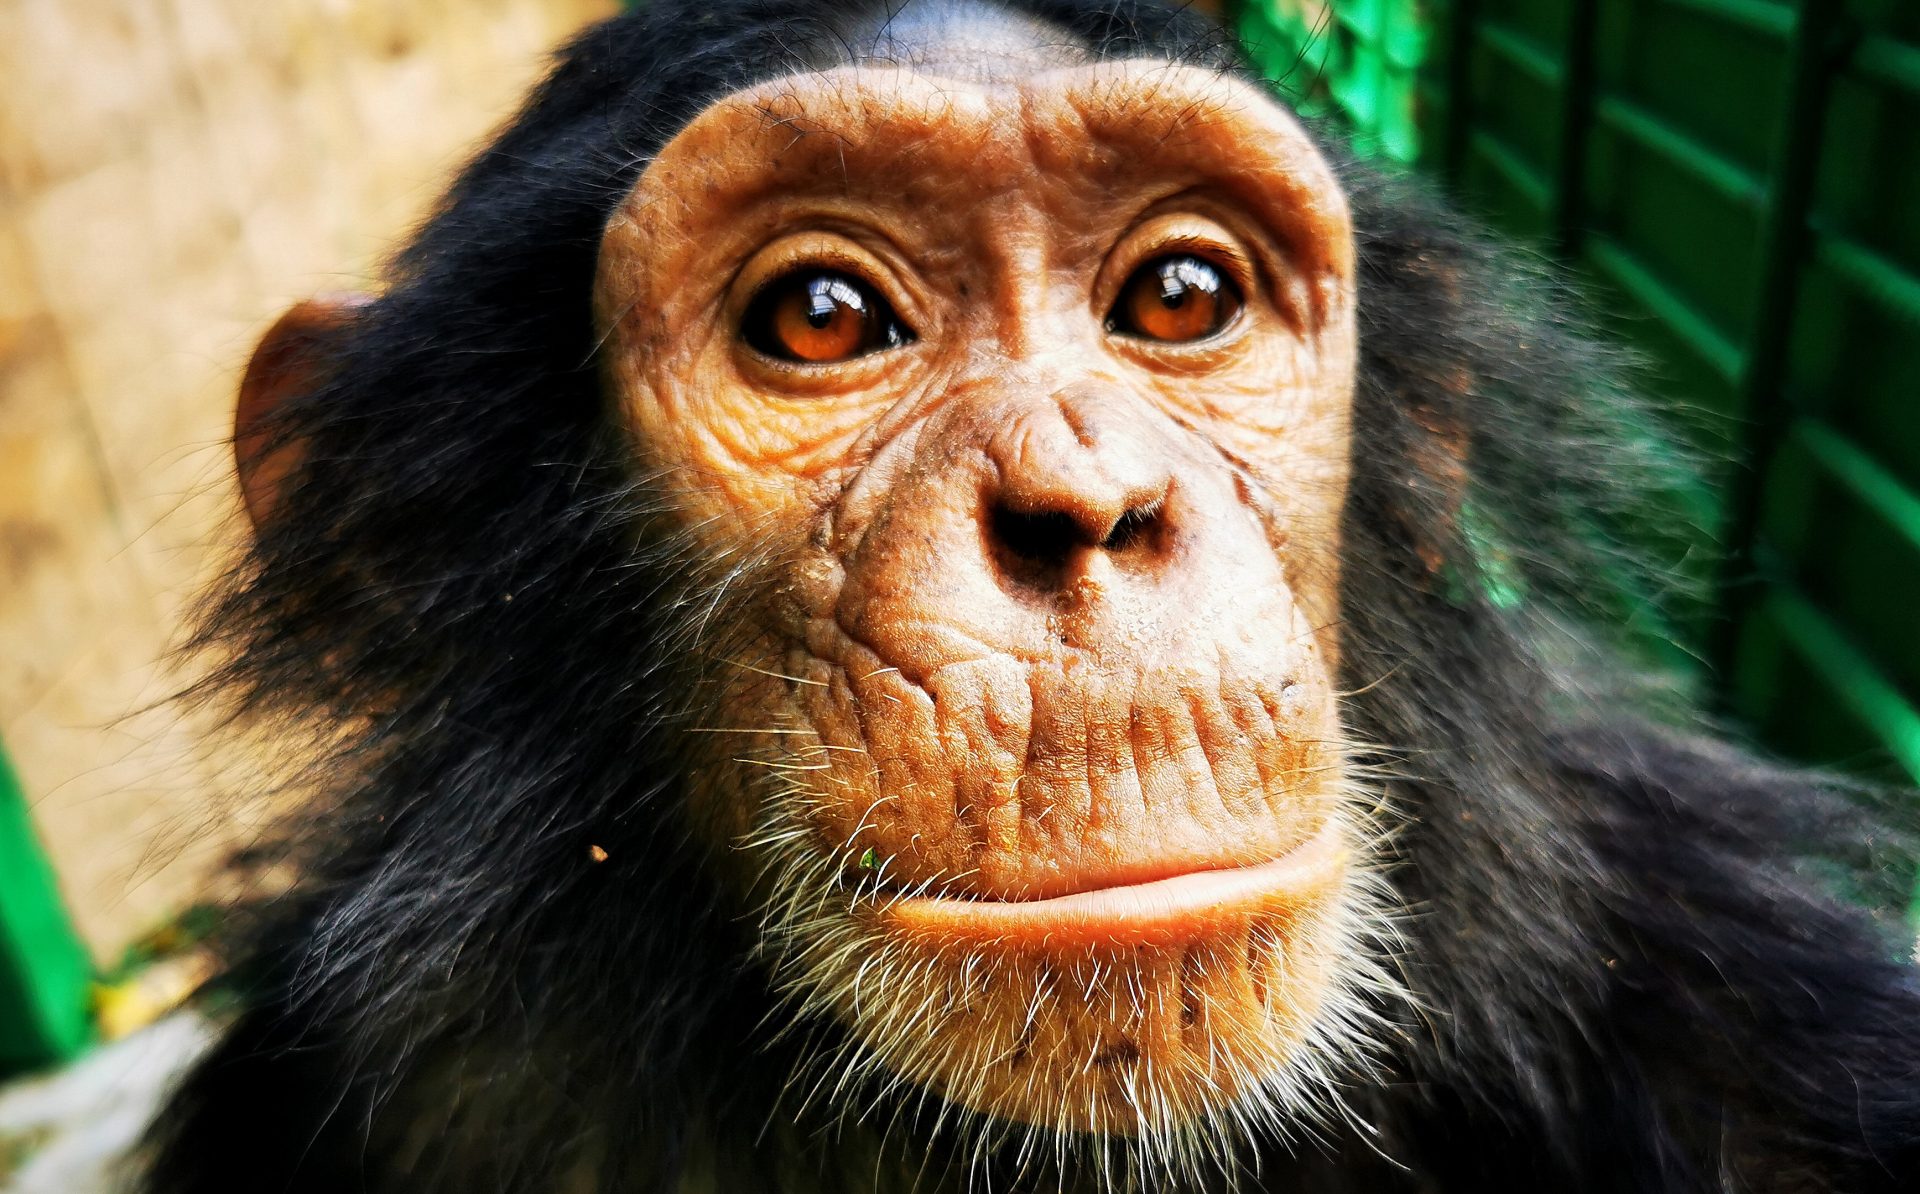 goodies for the chimps – thank YOU, Kelly!